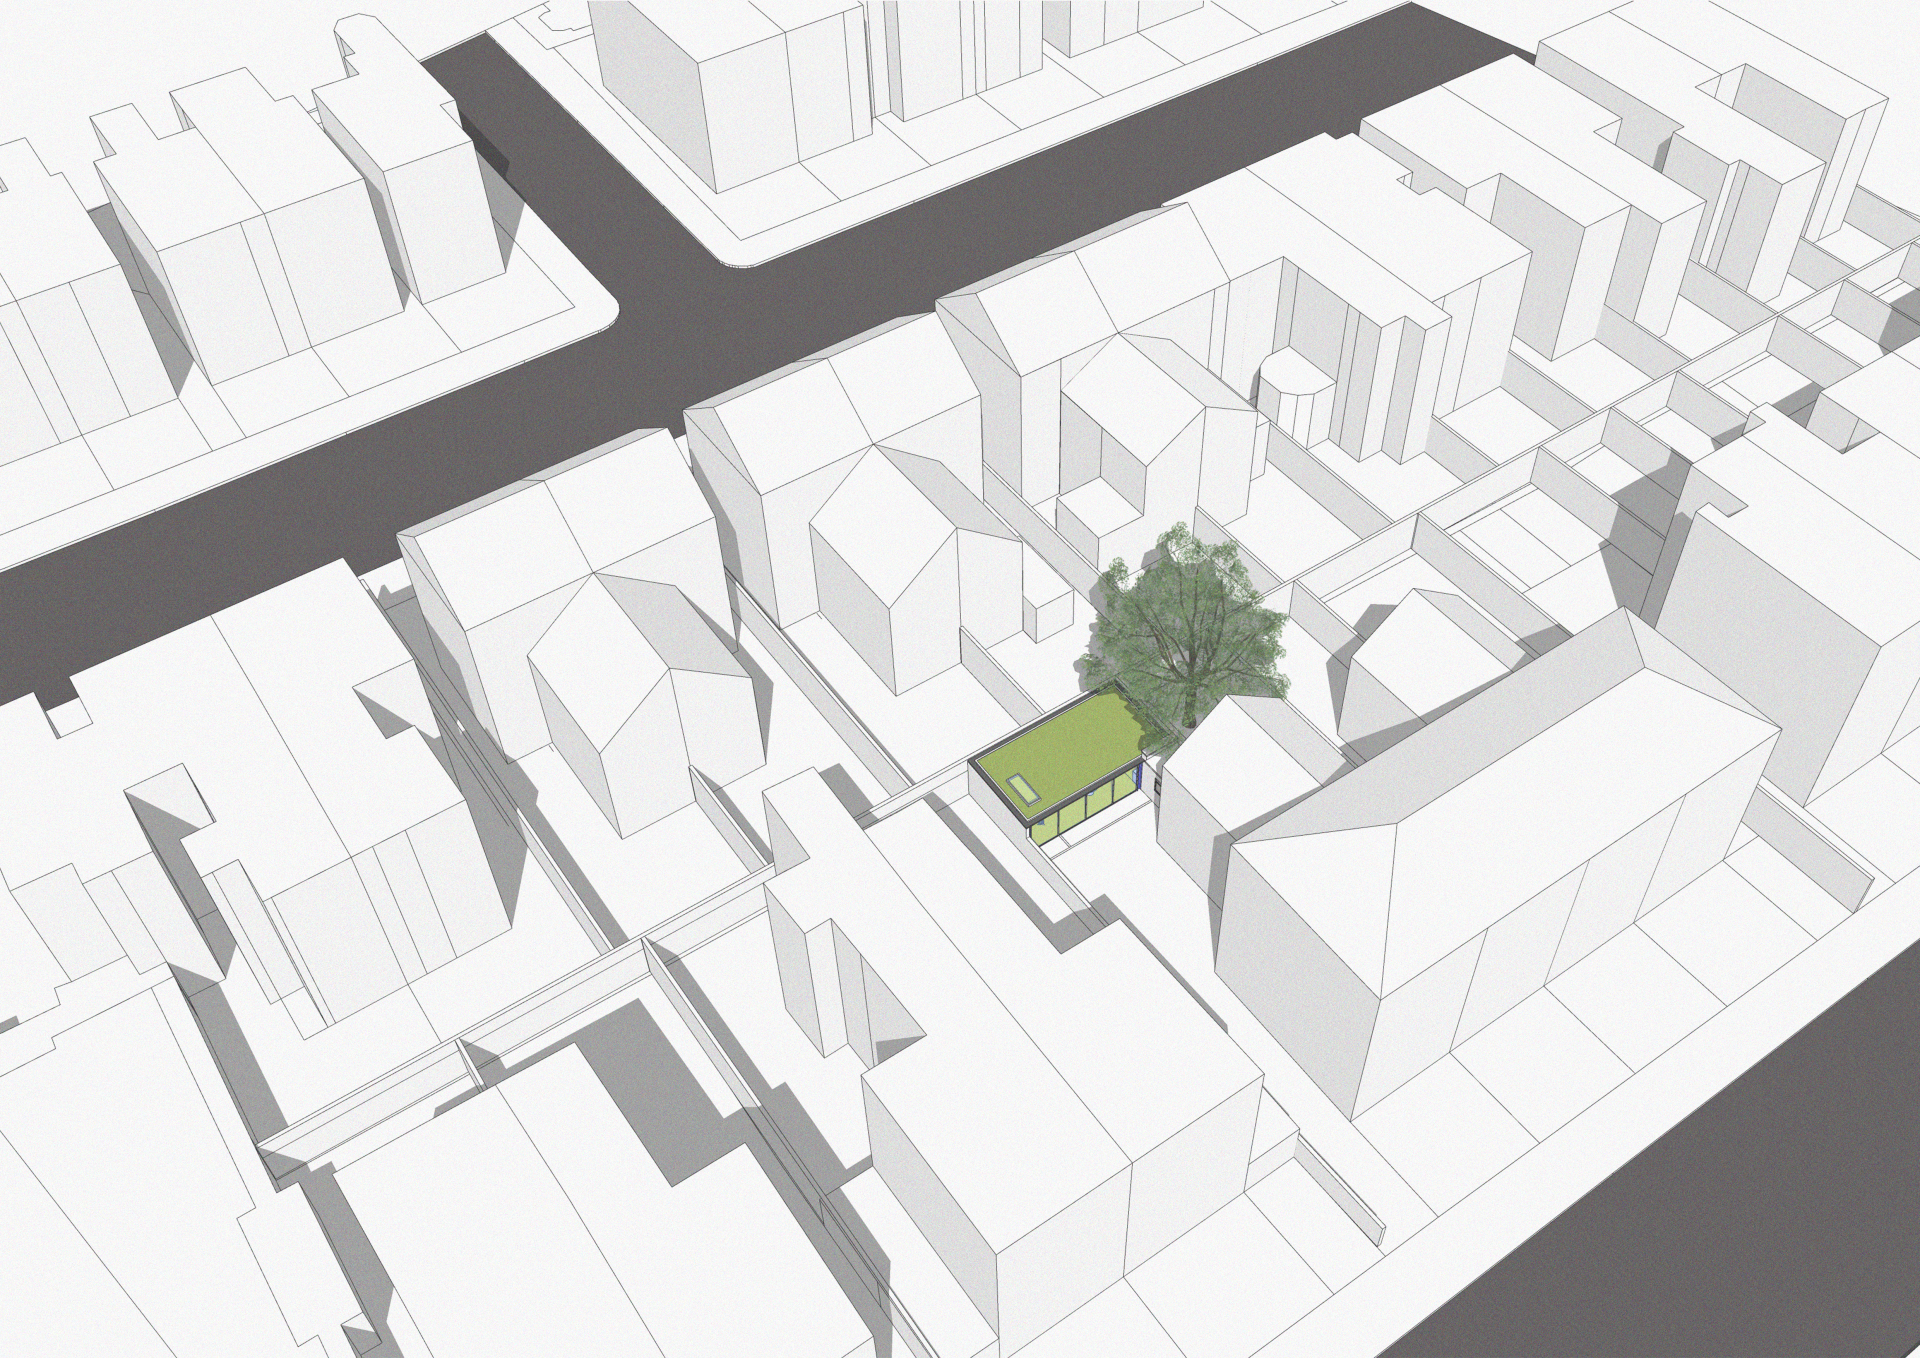 An image showing a context model of a studio project in Hove